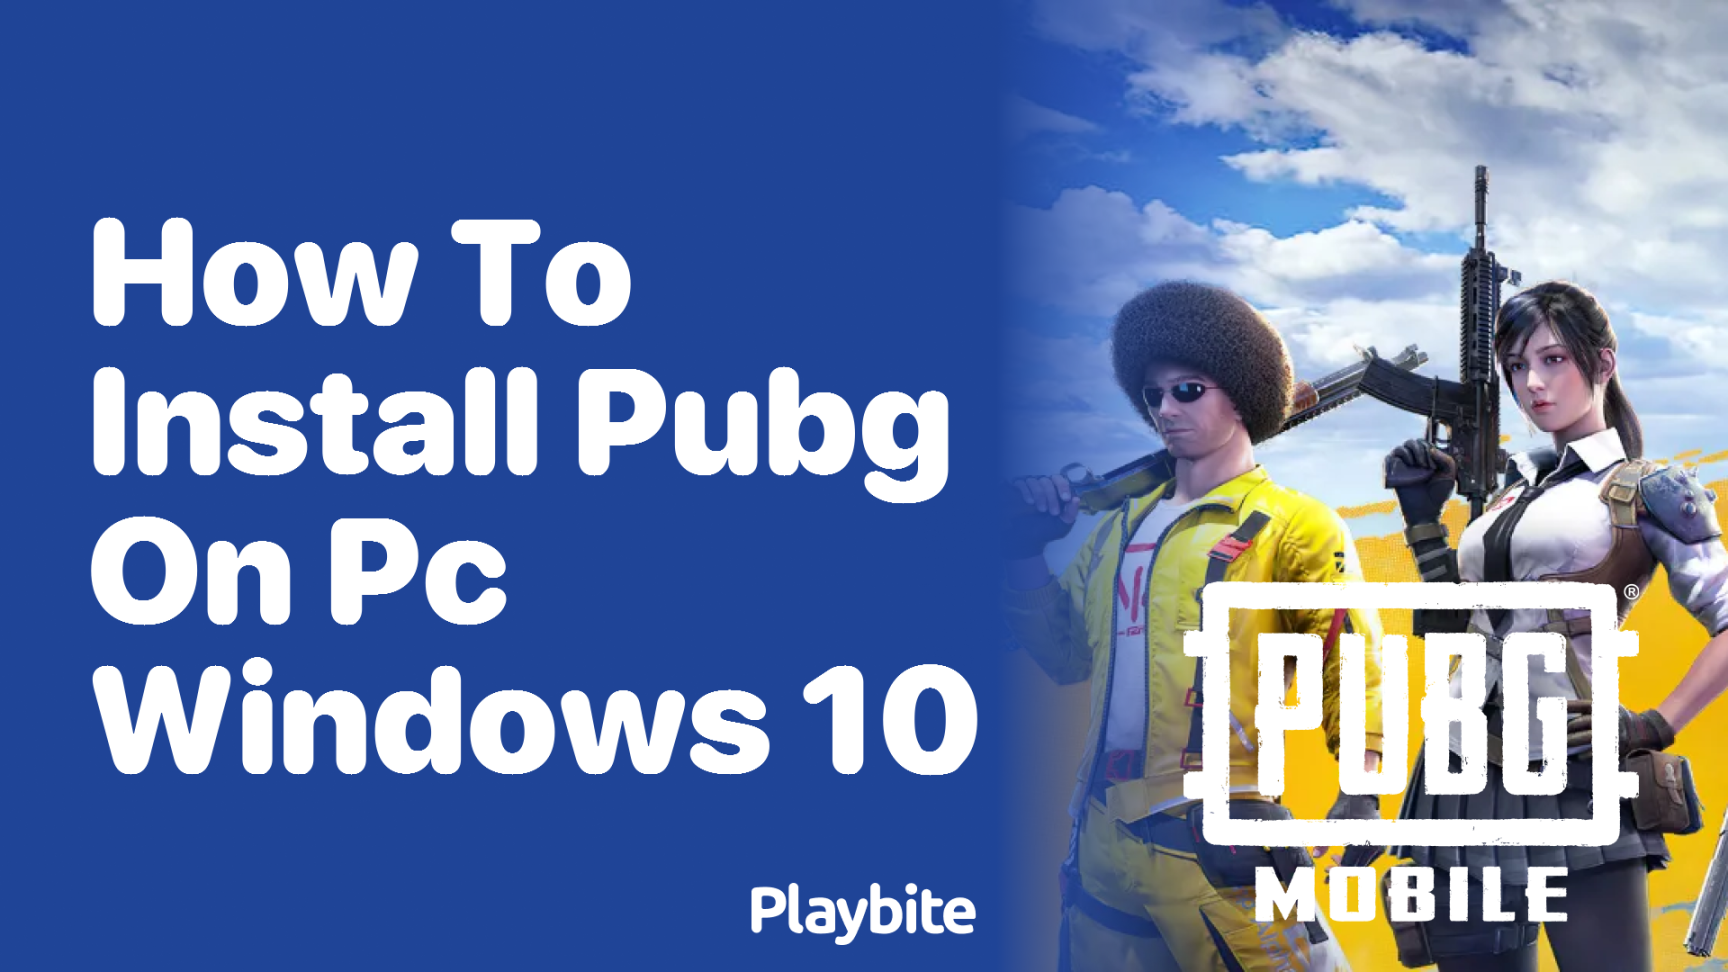 How to Install PUBG on PC Windows : A Step-by-Step Guide - Playbite